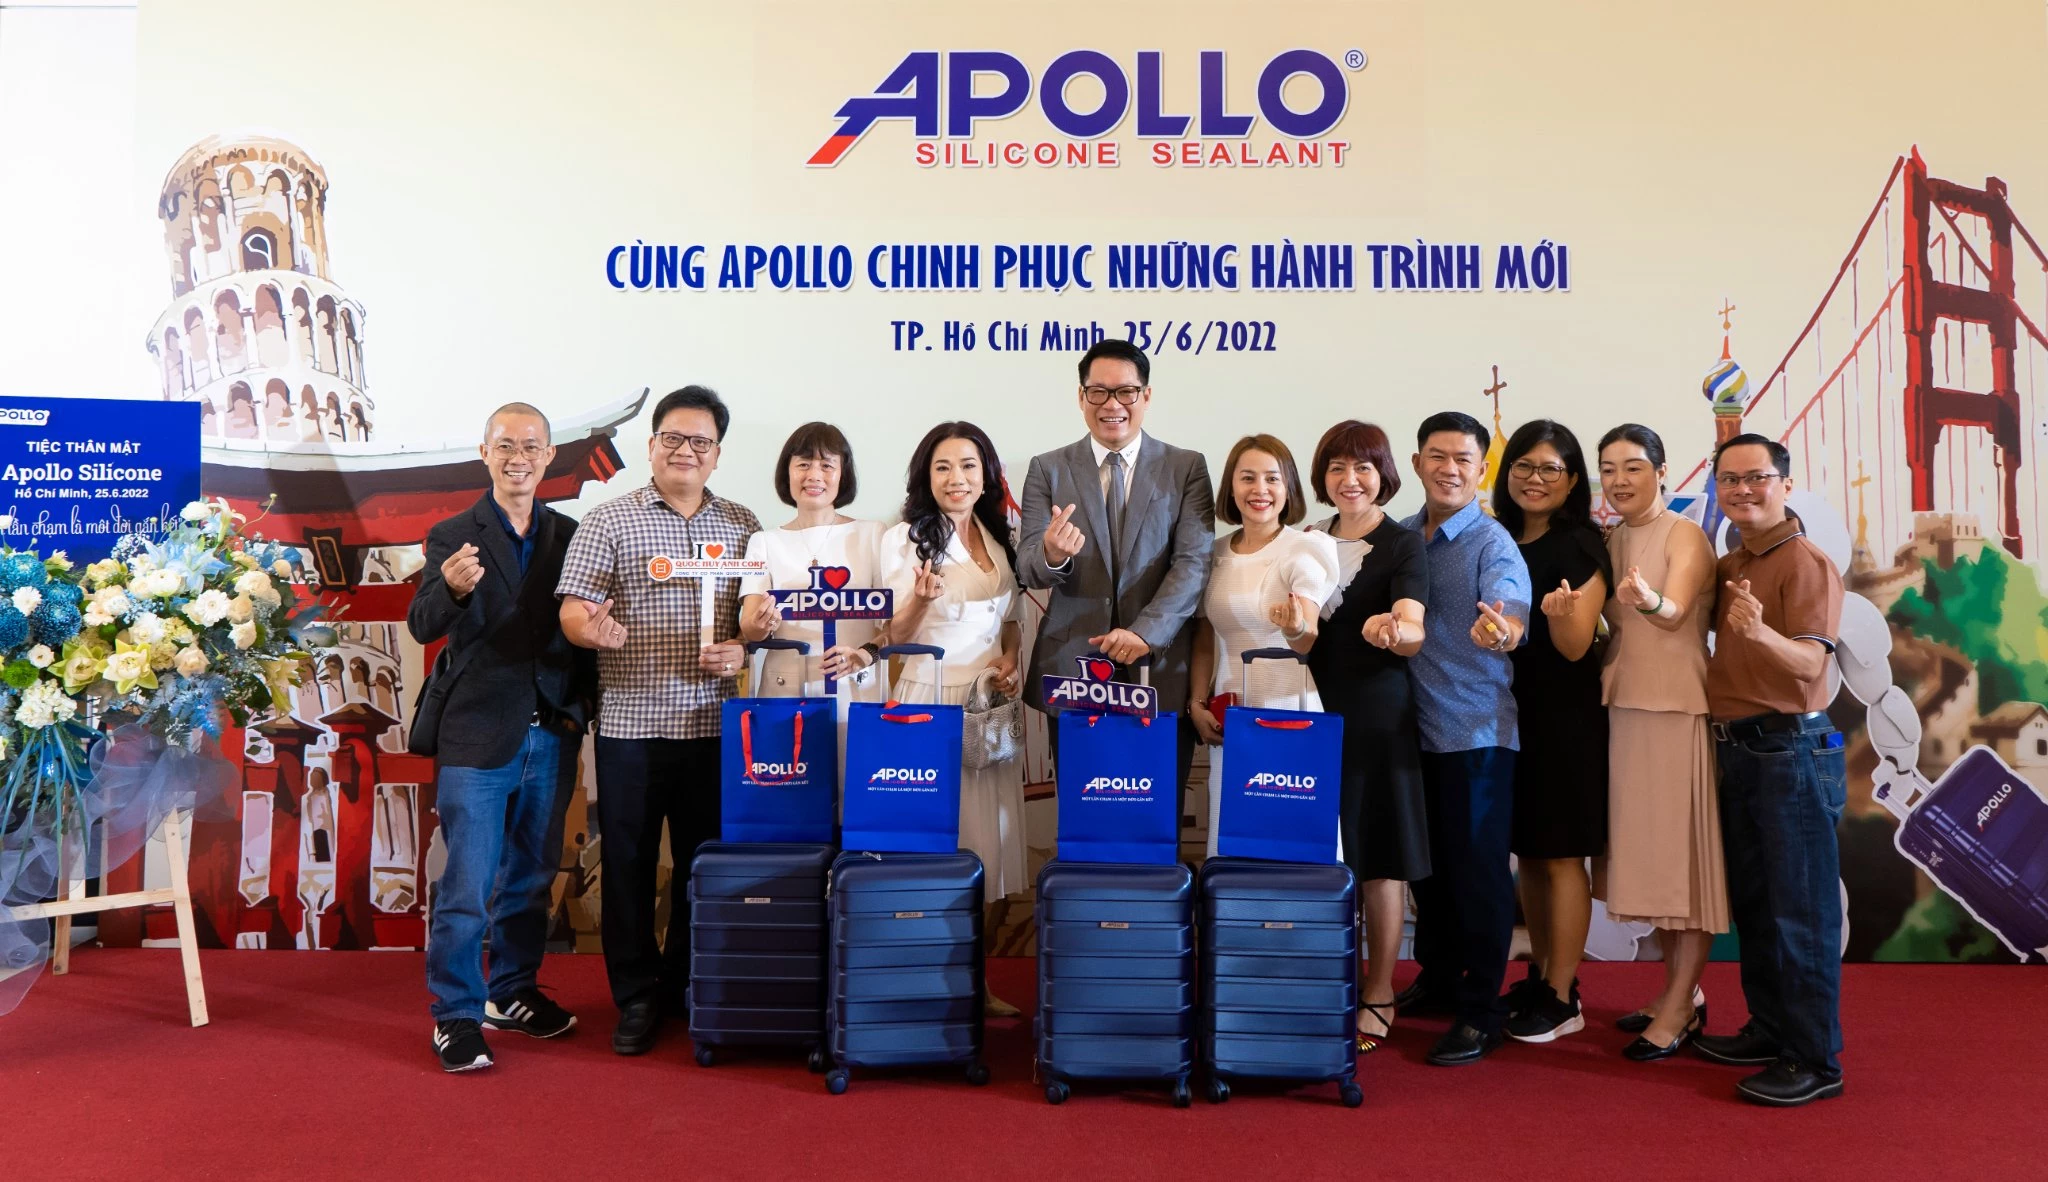 Join Apollo to Conquer New Journeys